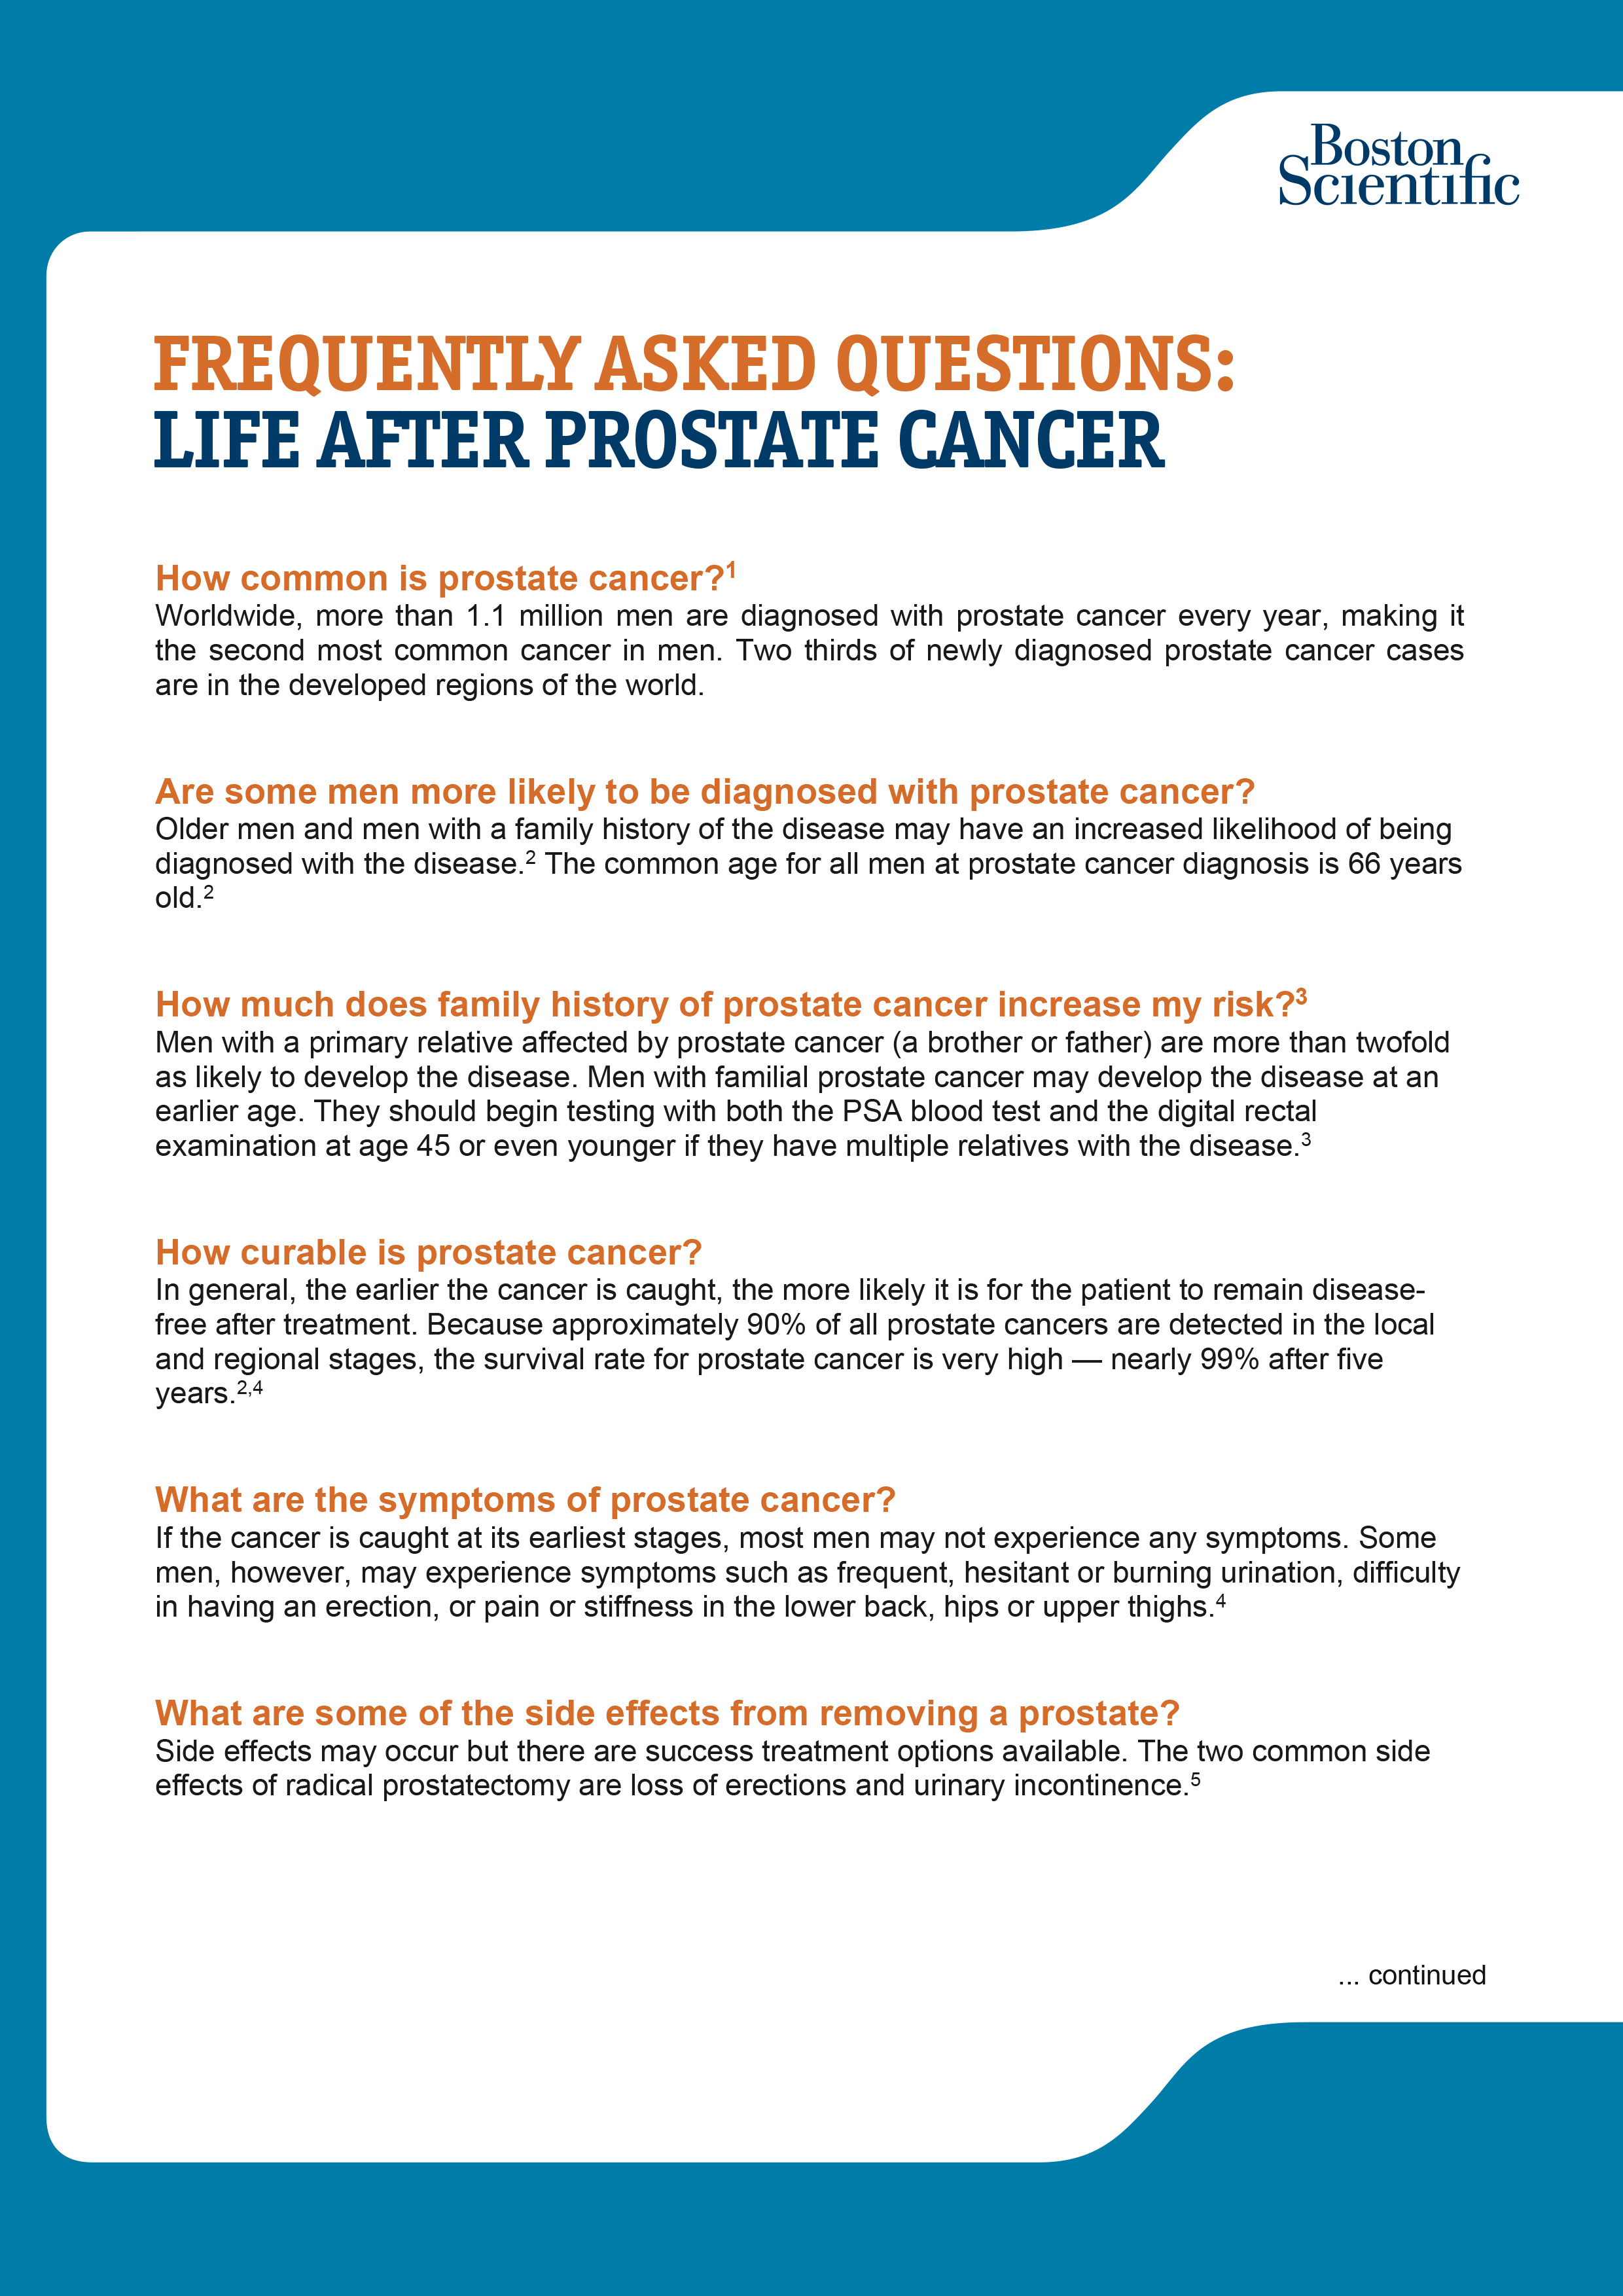 Frequently Asked Questions about Life After Prostate Cancer